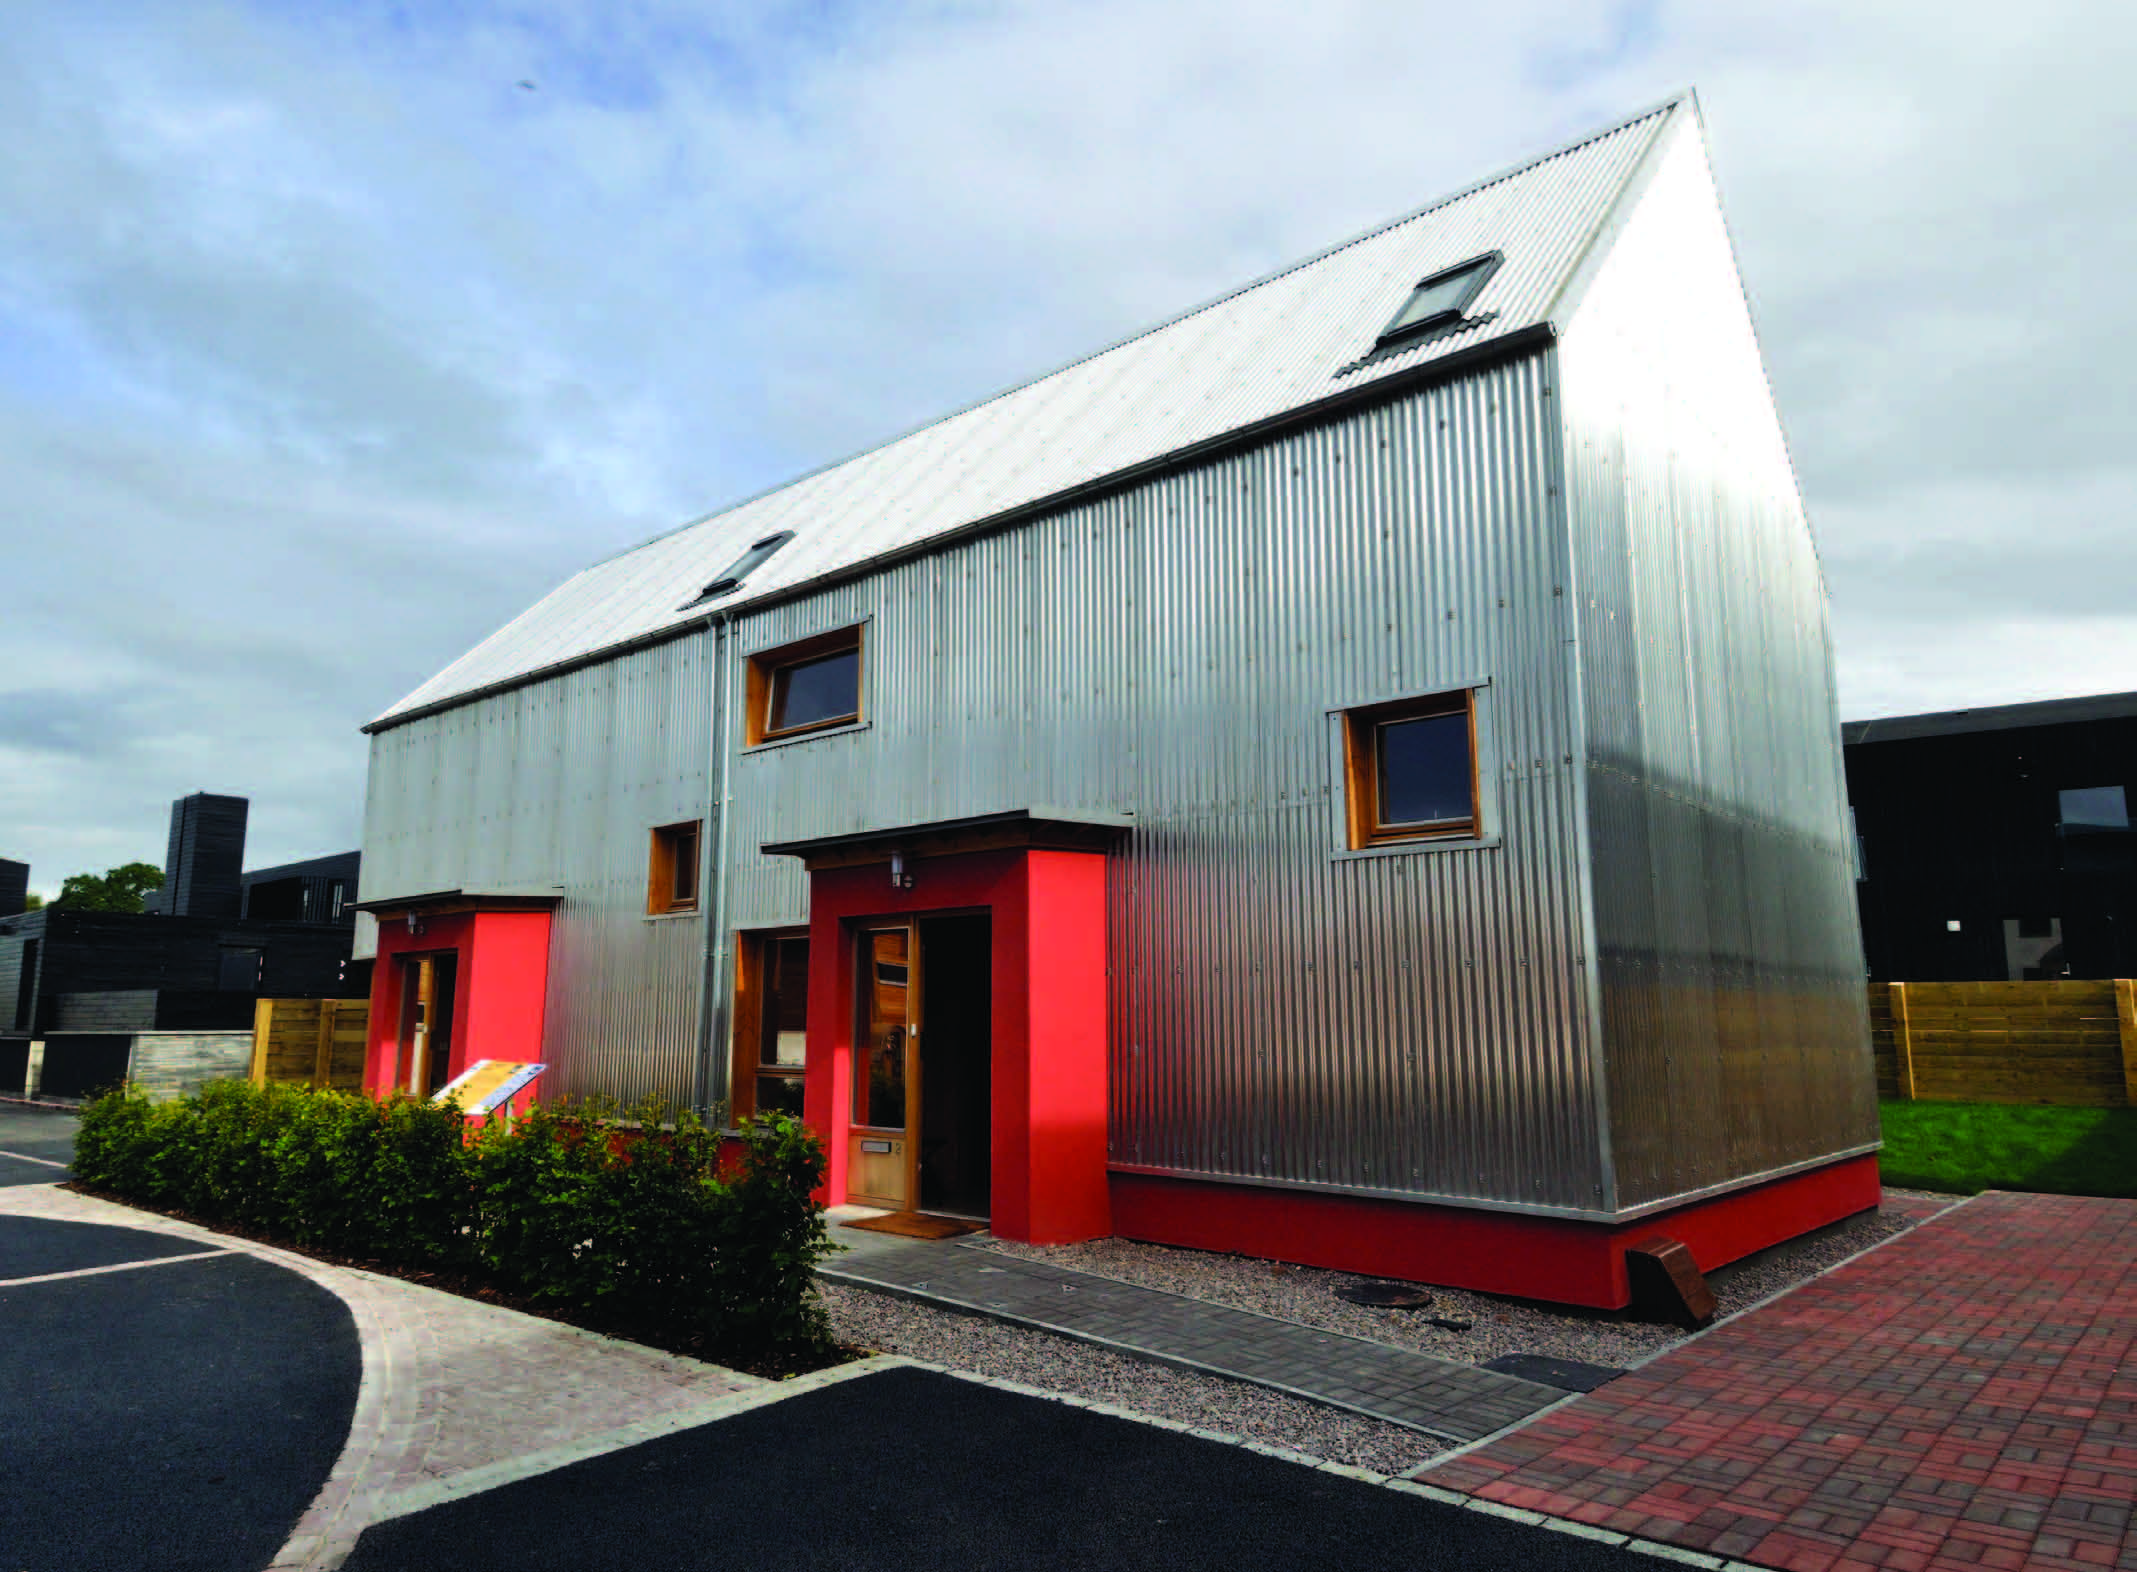 Two semi detached building covered in aluminium sheet and a red painted feature on the bottom half of the ground floor.